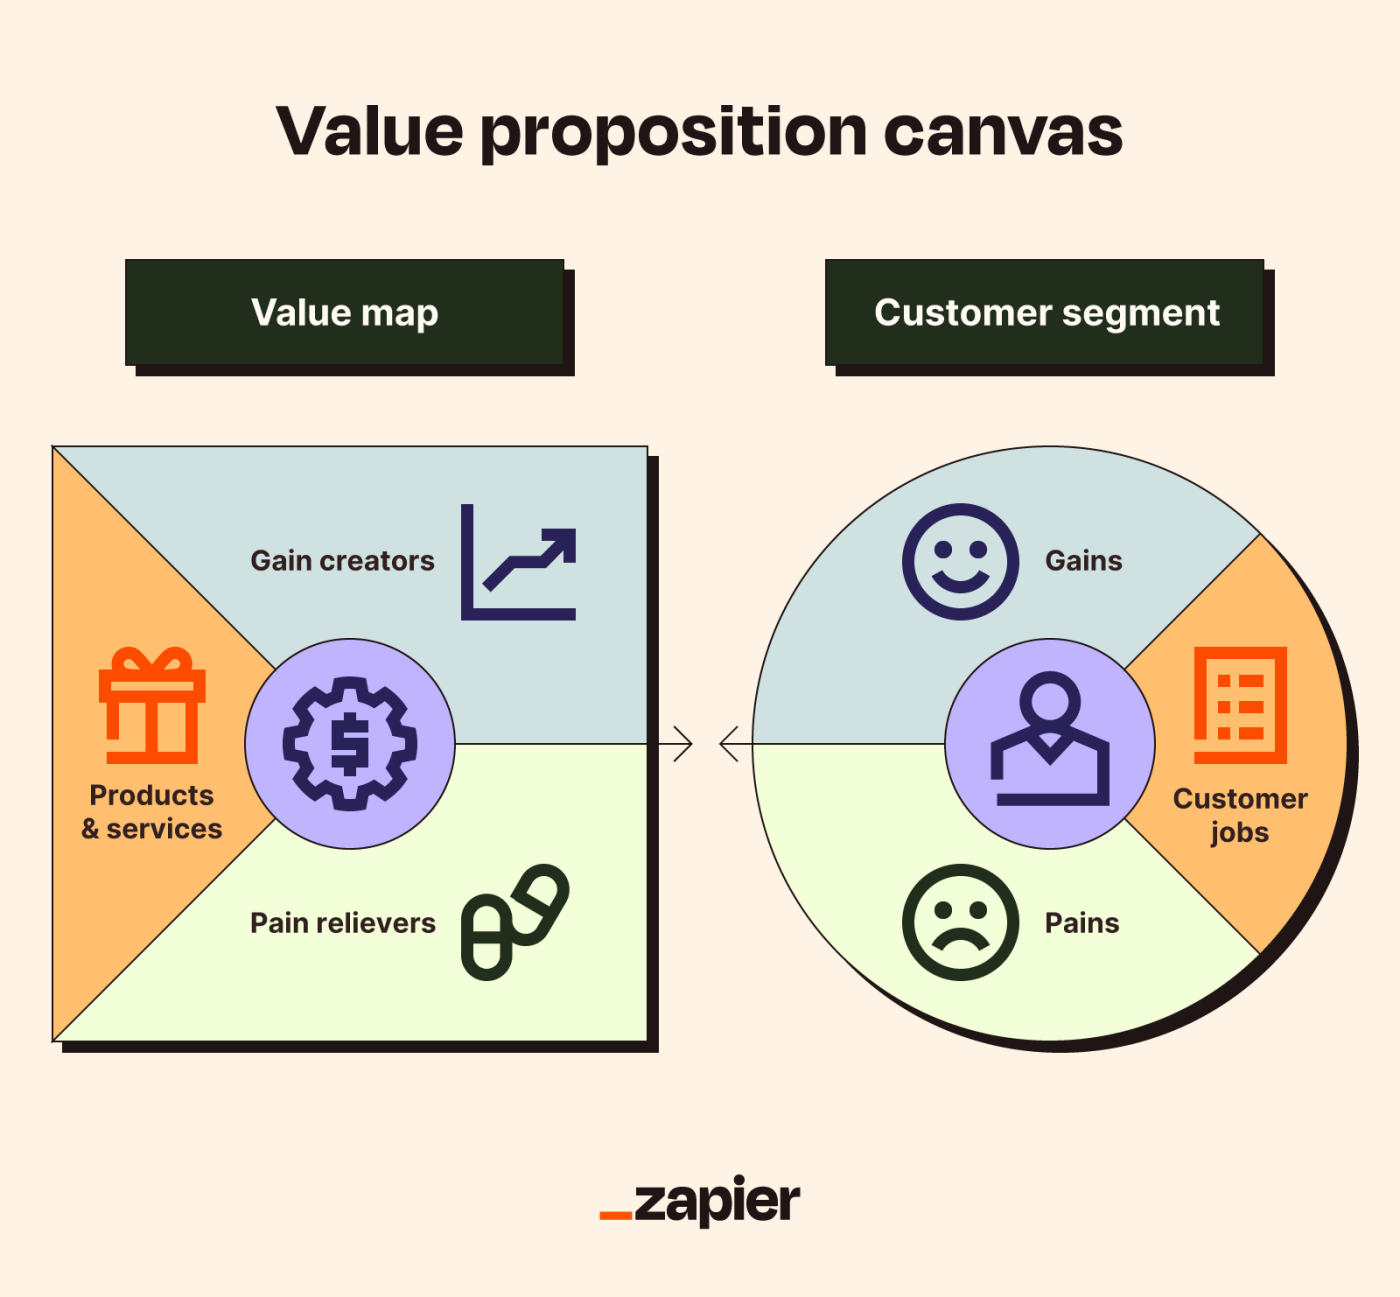 A value proposition canvas featuring the value map and customer segment